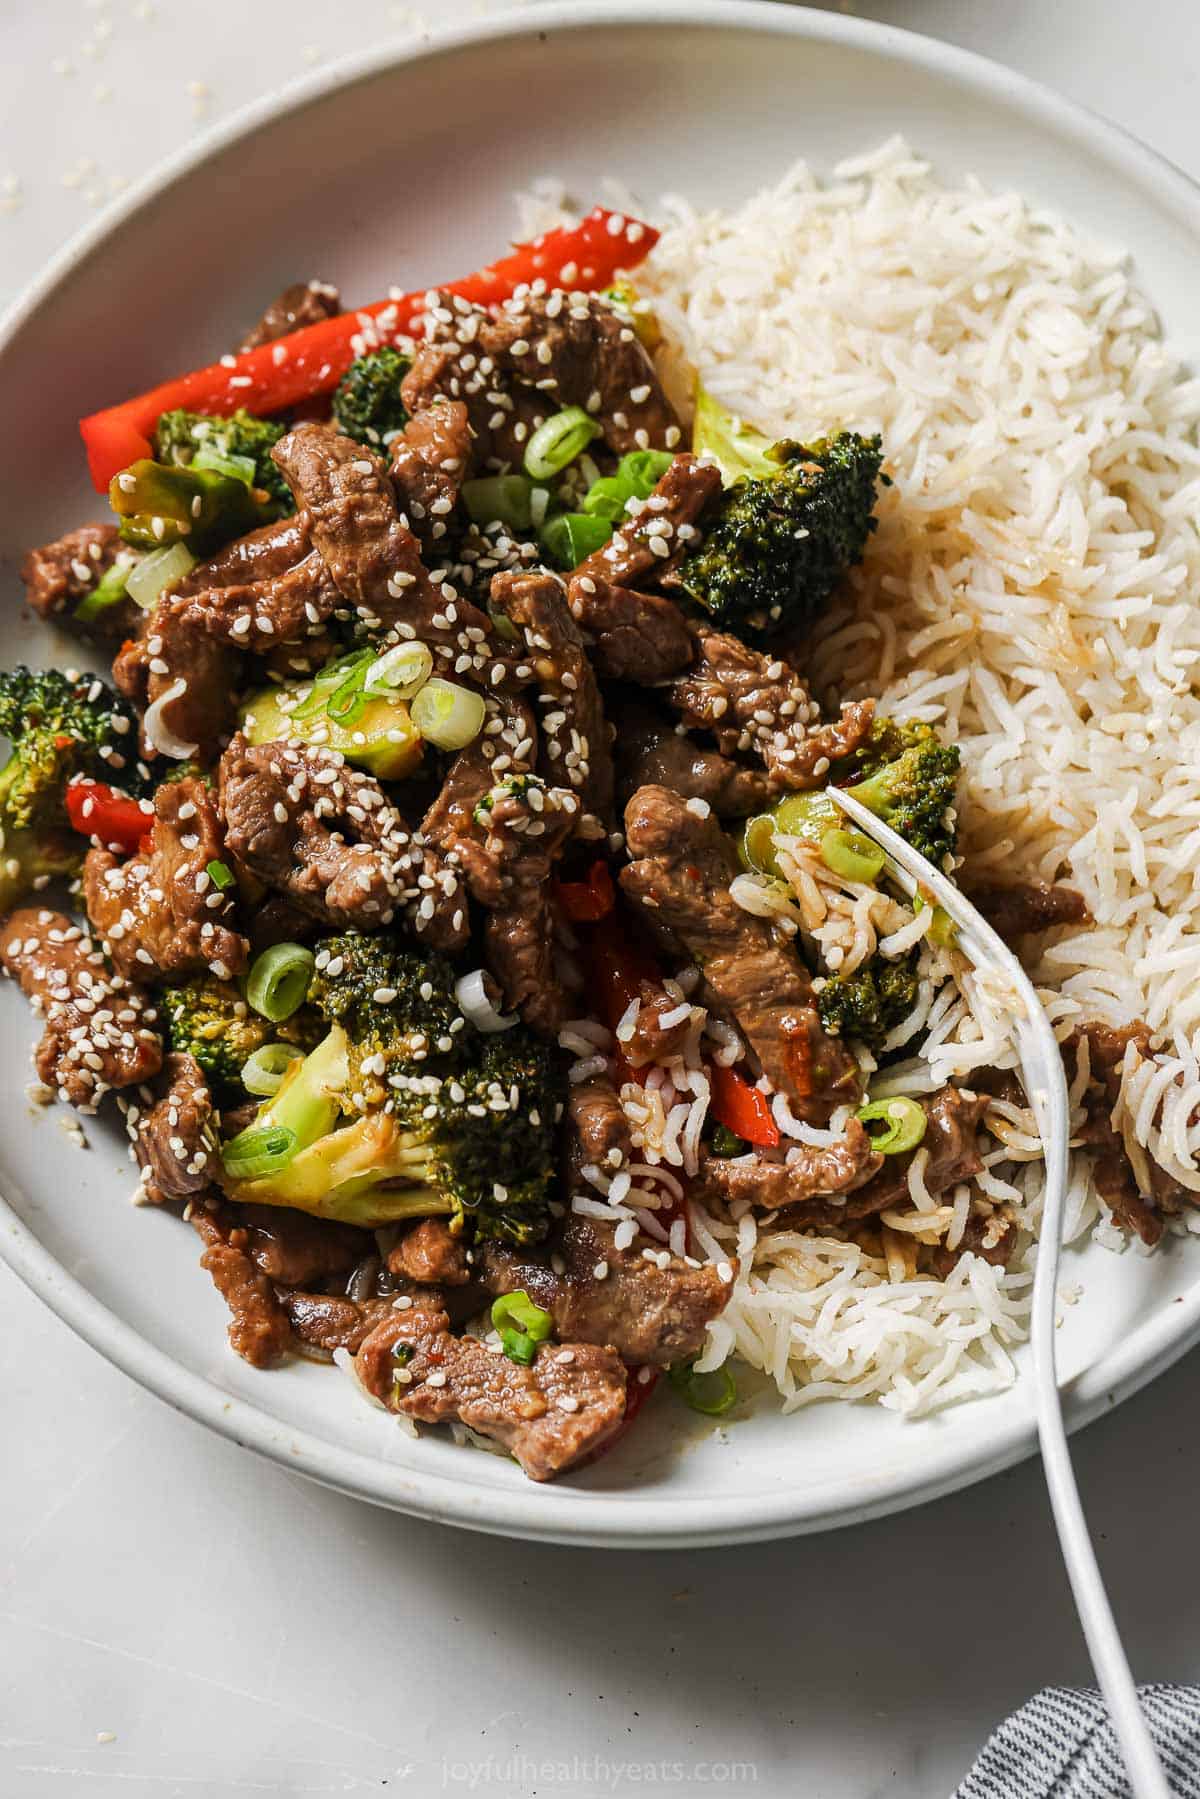 Beef and broccoli stir fry with a side of rice noodles.